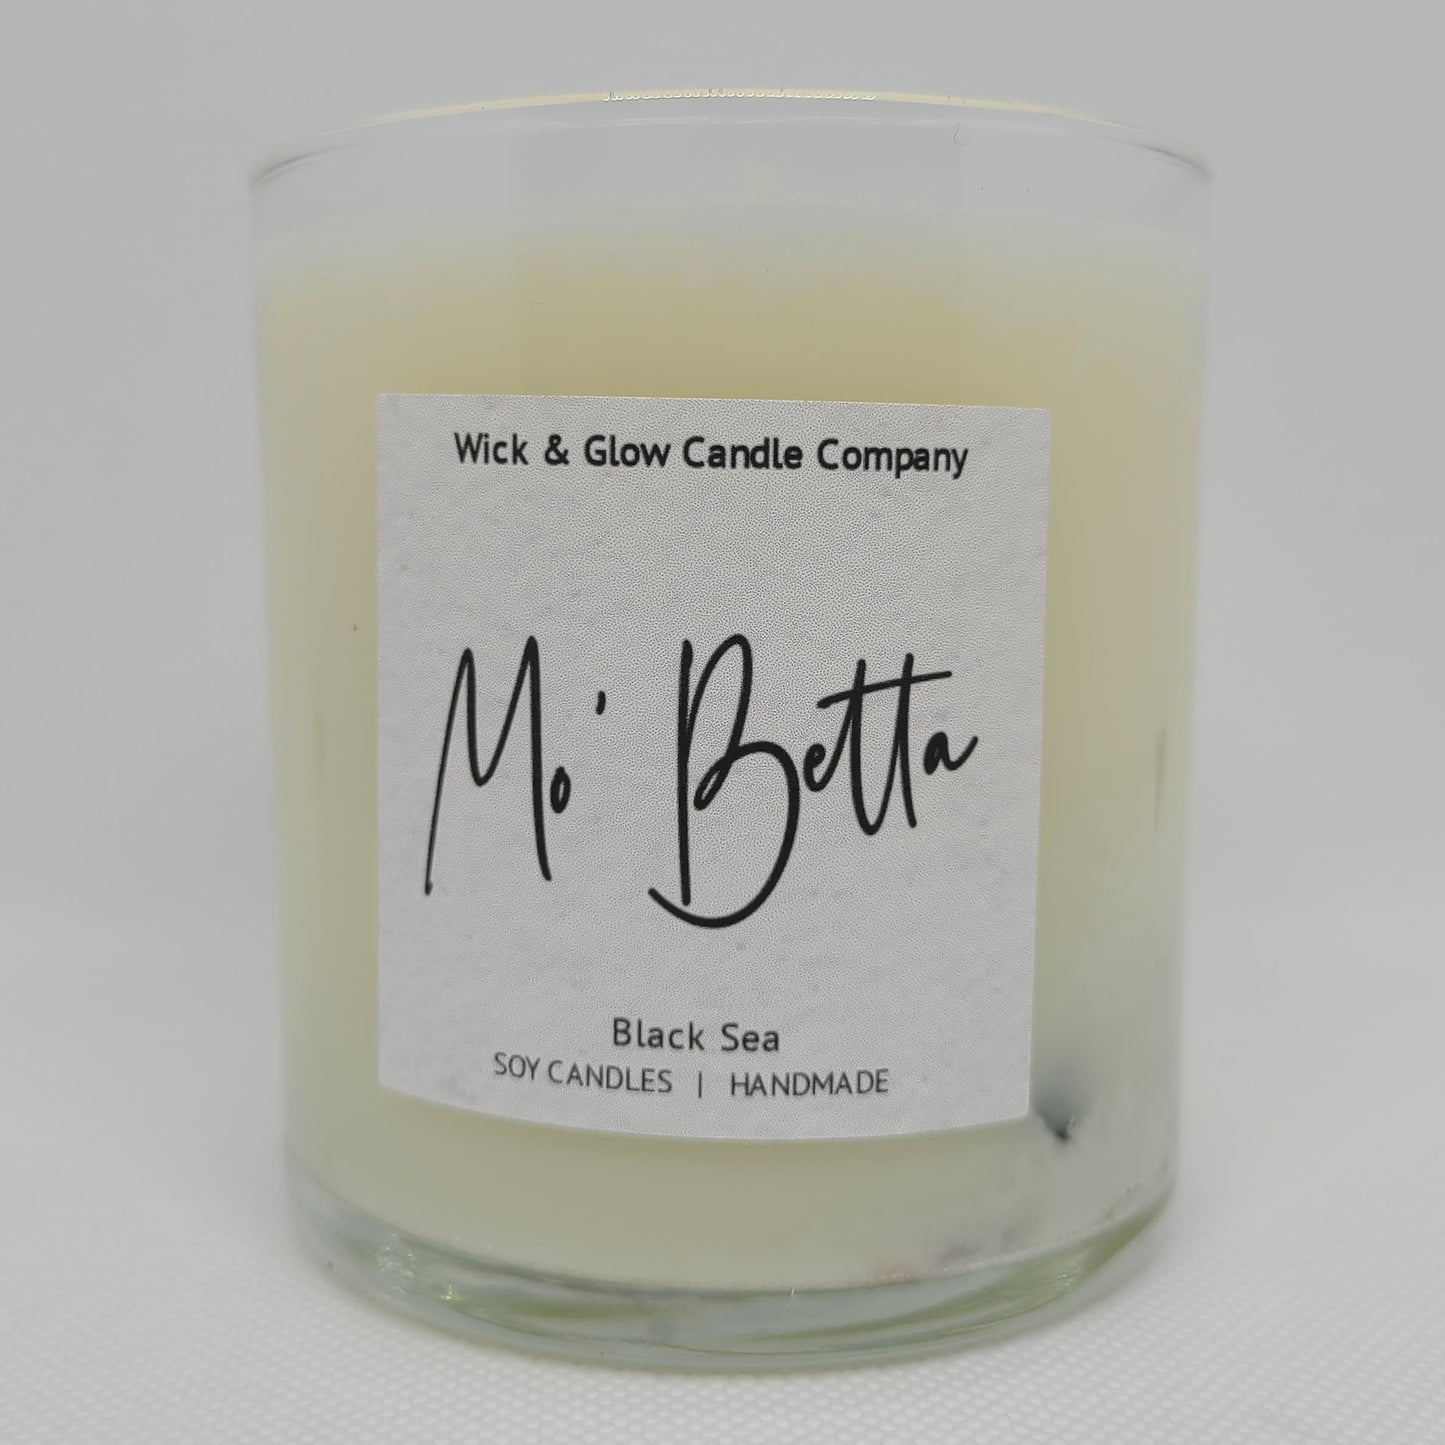 Mo' Betta -Black Sea Luxury Scented Candle - The Wick and Glow Candle Company